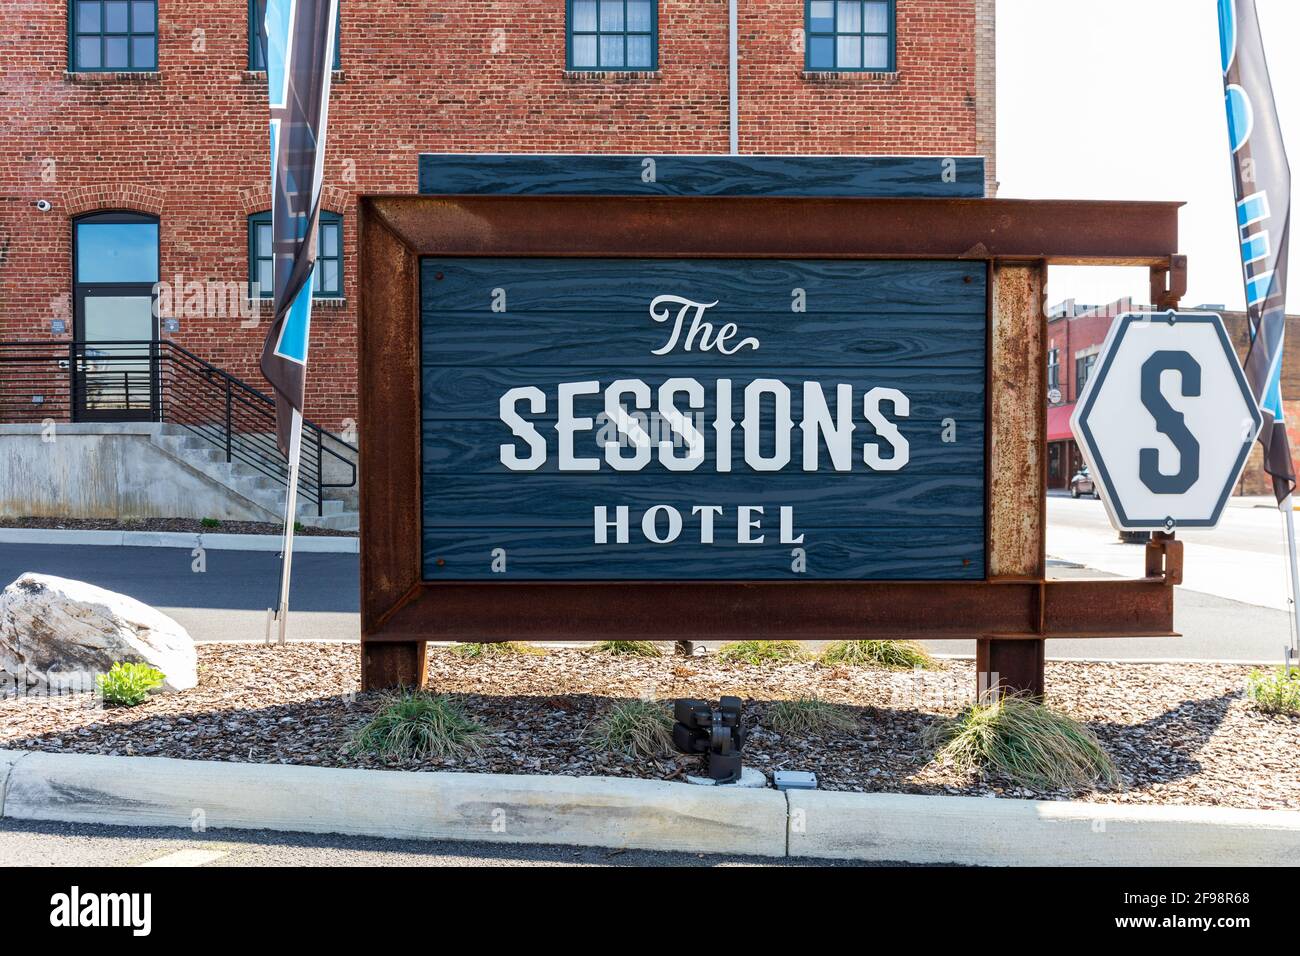 BRISTOL, TN-VA, USA-7 APRIL 2021: The street sign for  The Sessions Hotel, named after the famous 1927 recording sessions of founding country  musican Stock Photo